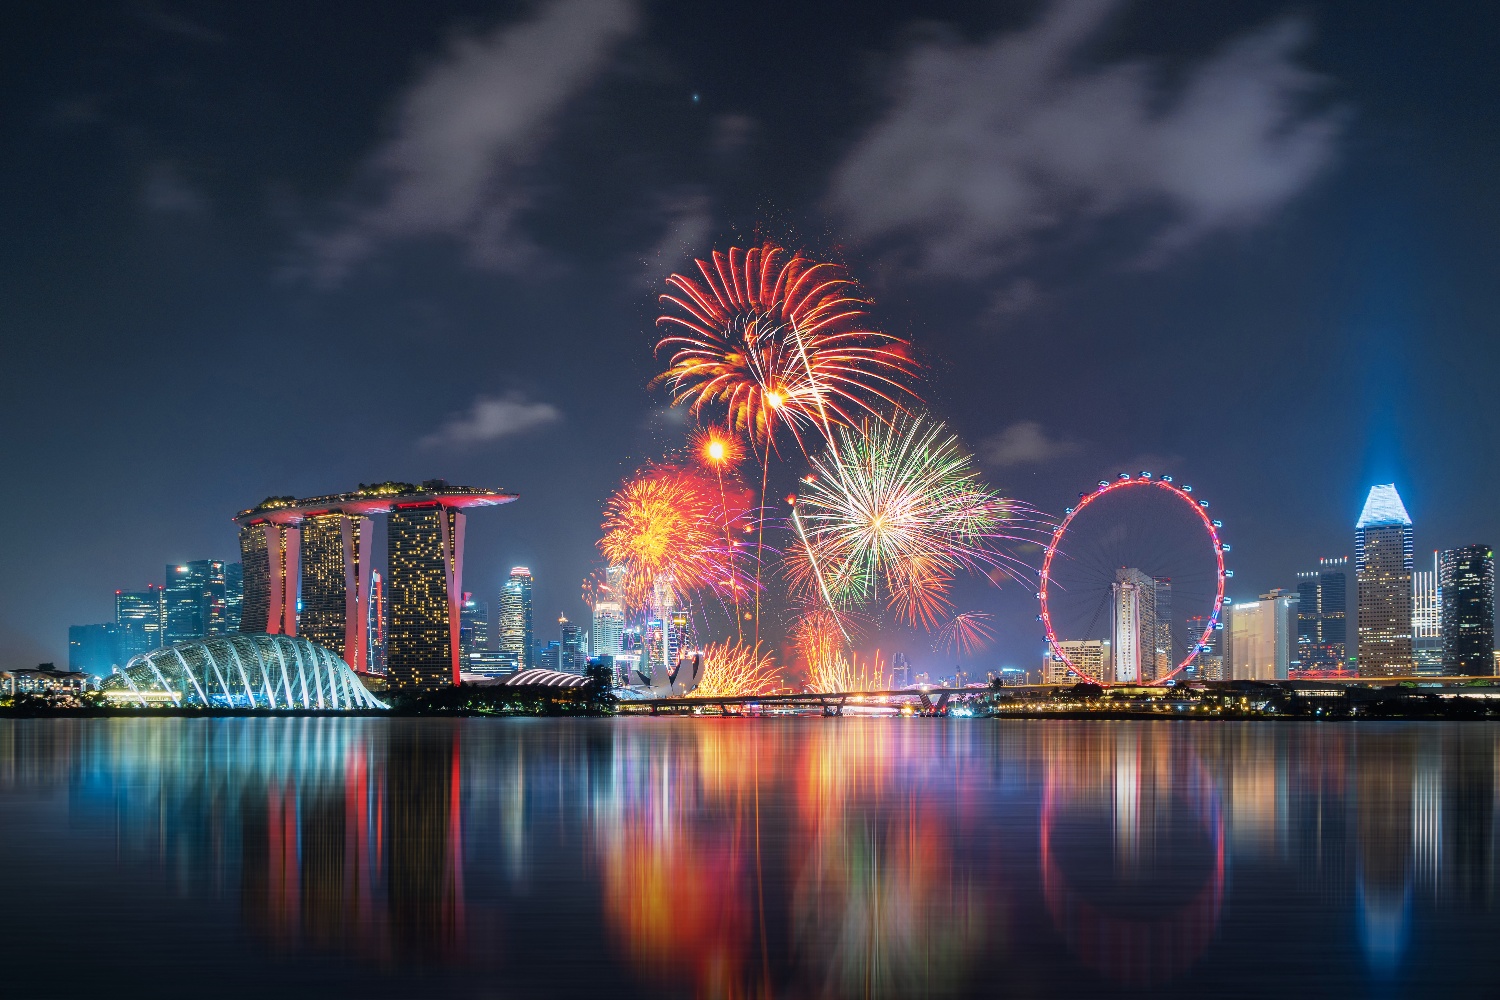 Come and join us for a ‘Celebration of all things Singapore’